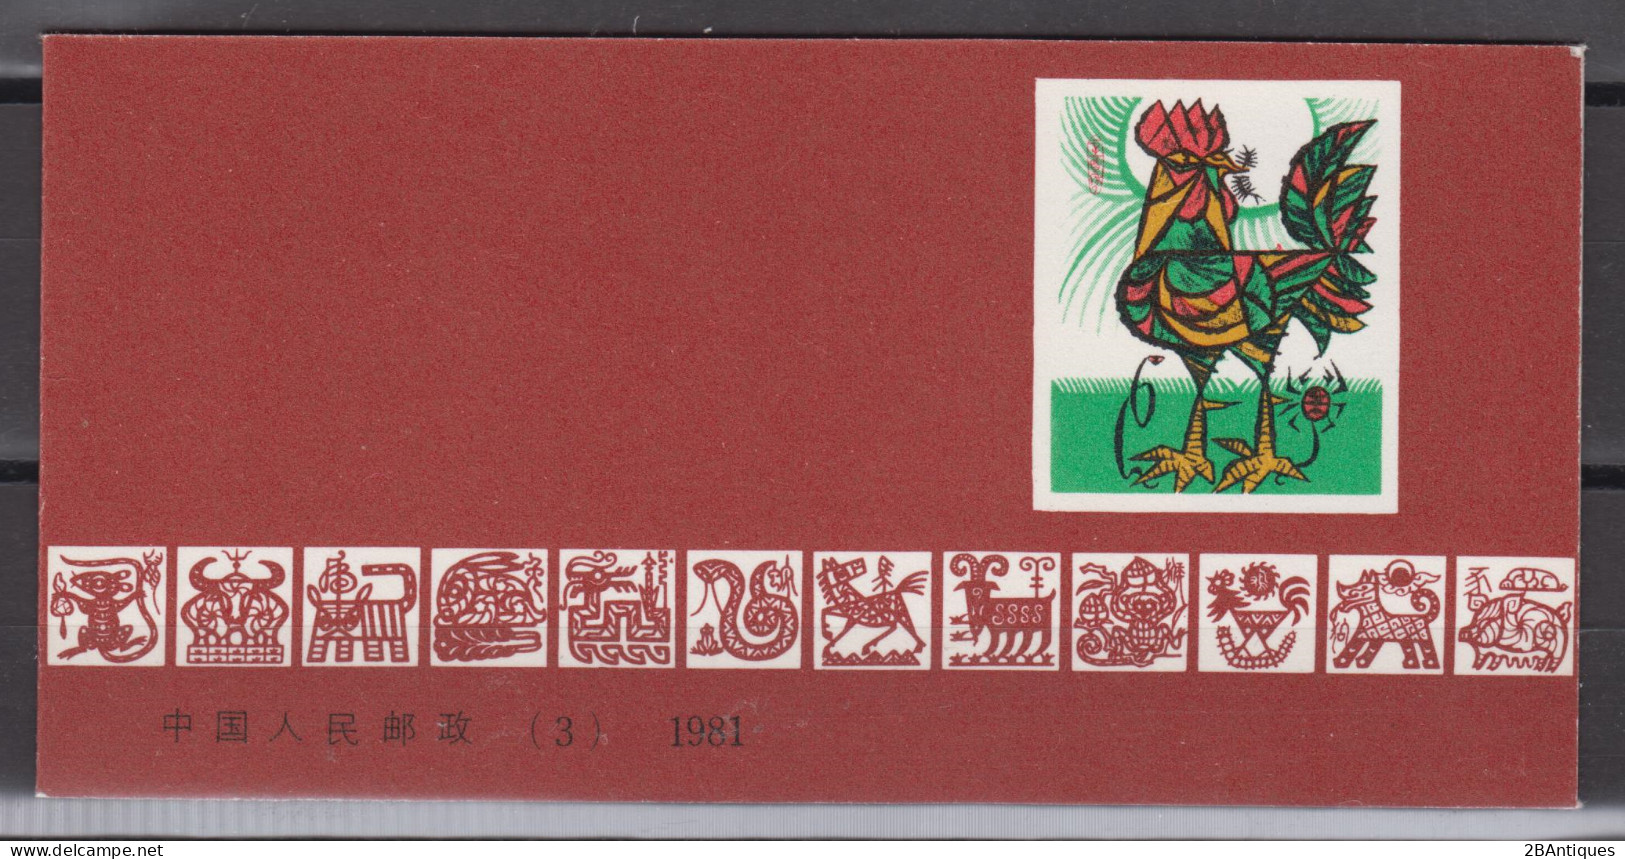 PR CHINA 1981 - Stamp Booklet Year Of The Rooster MNH** XF OG - Ongebruikt